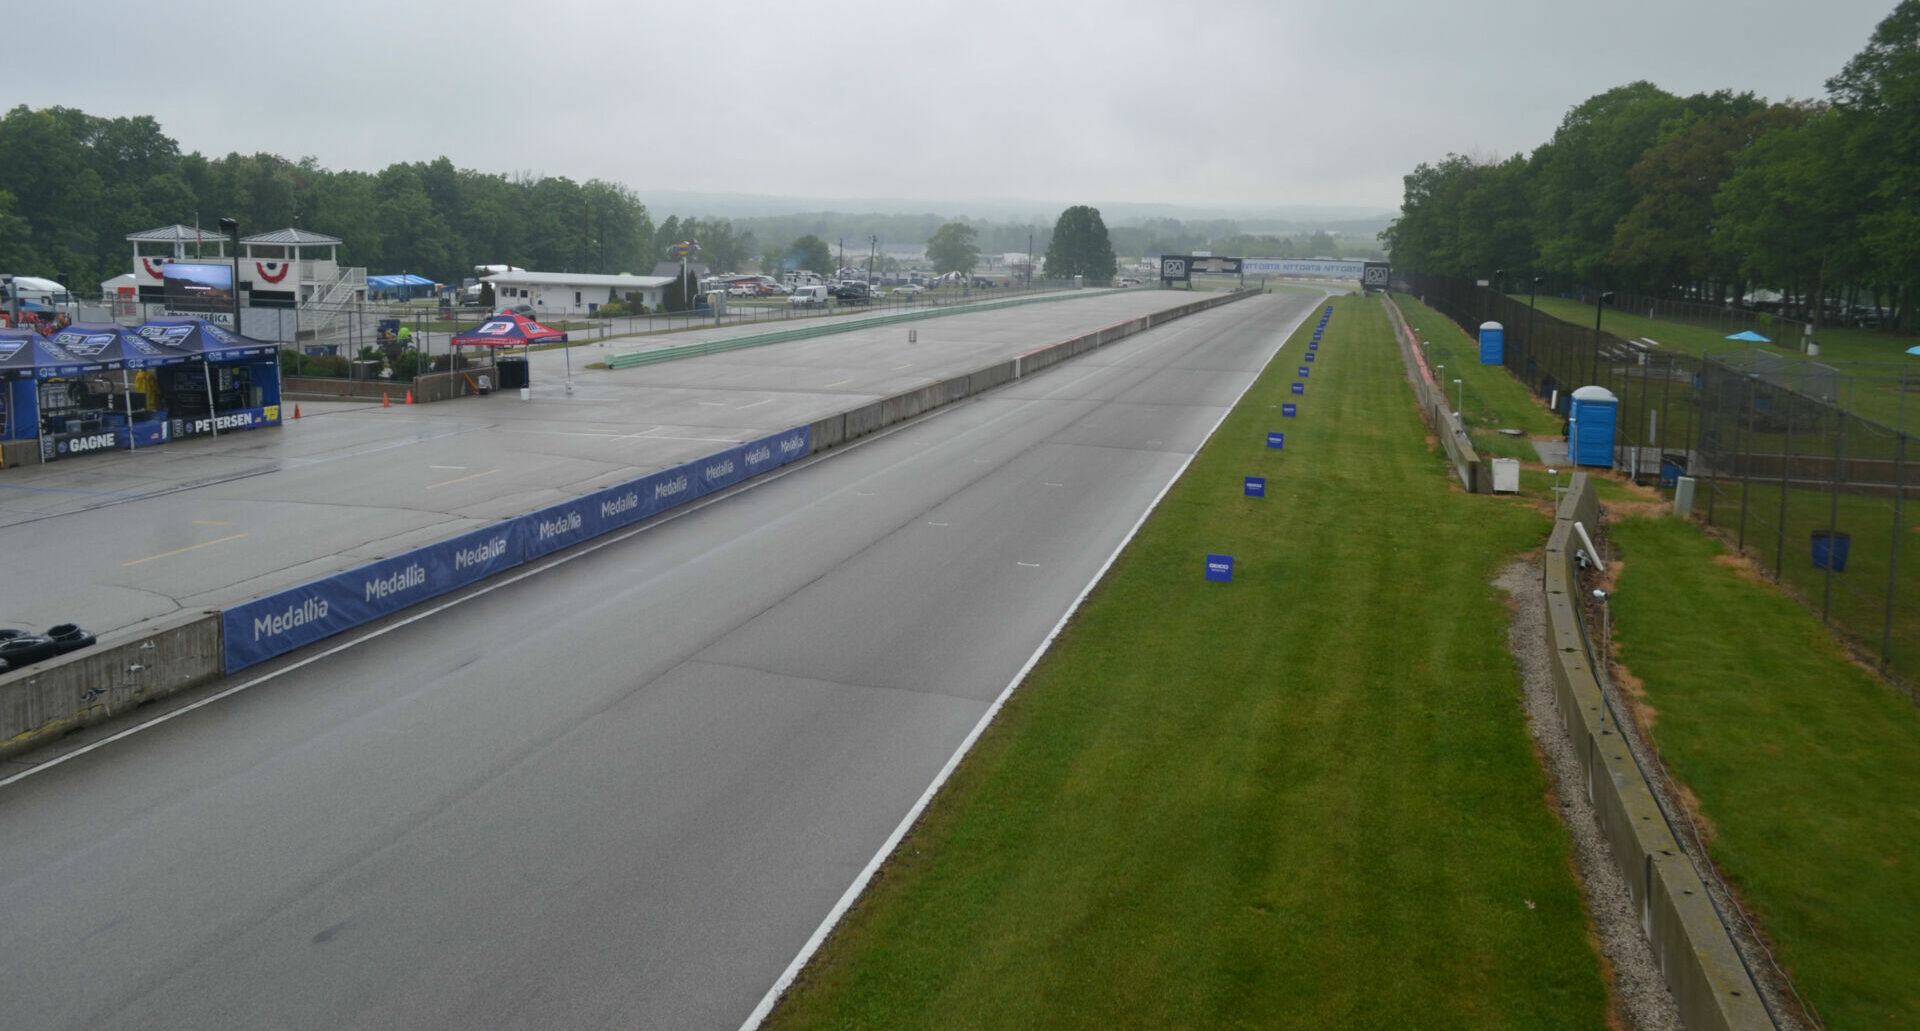 The view from the starter's bridge at Road America on Sunday morning. Photo by David Swarts.